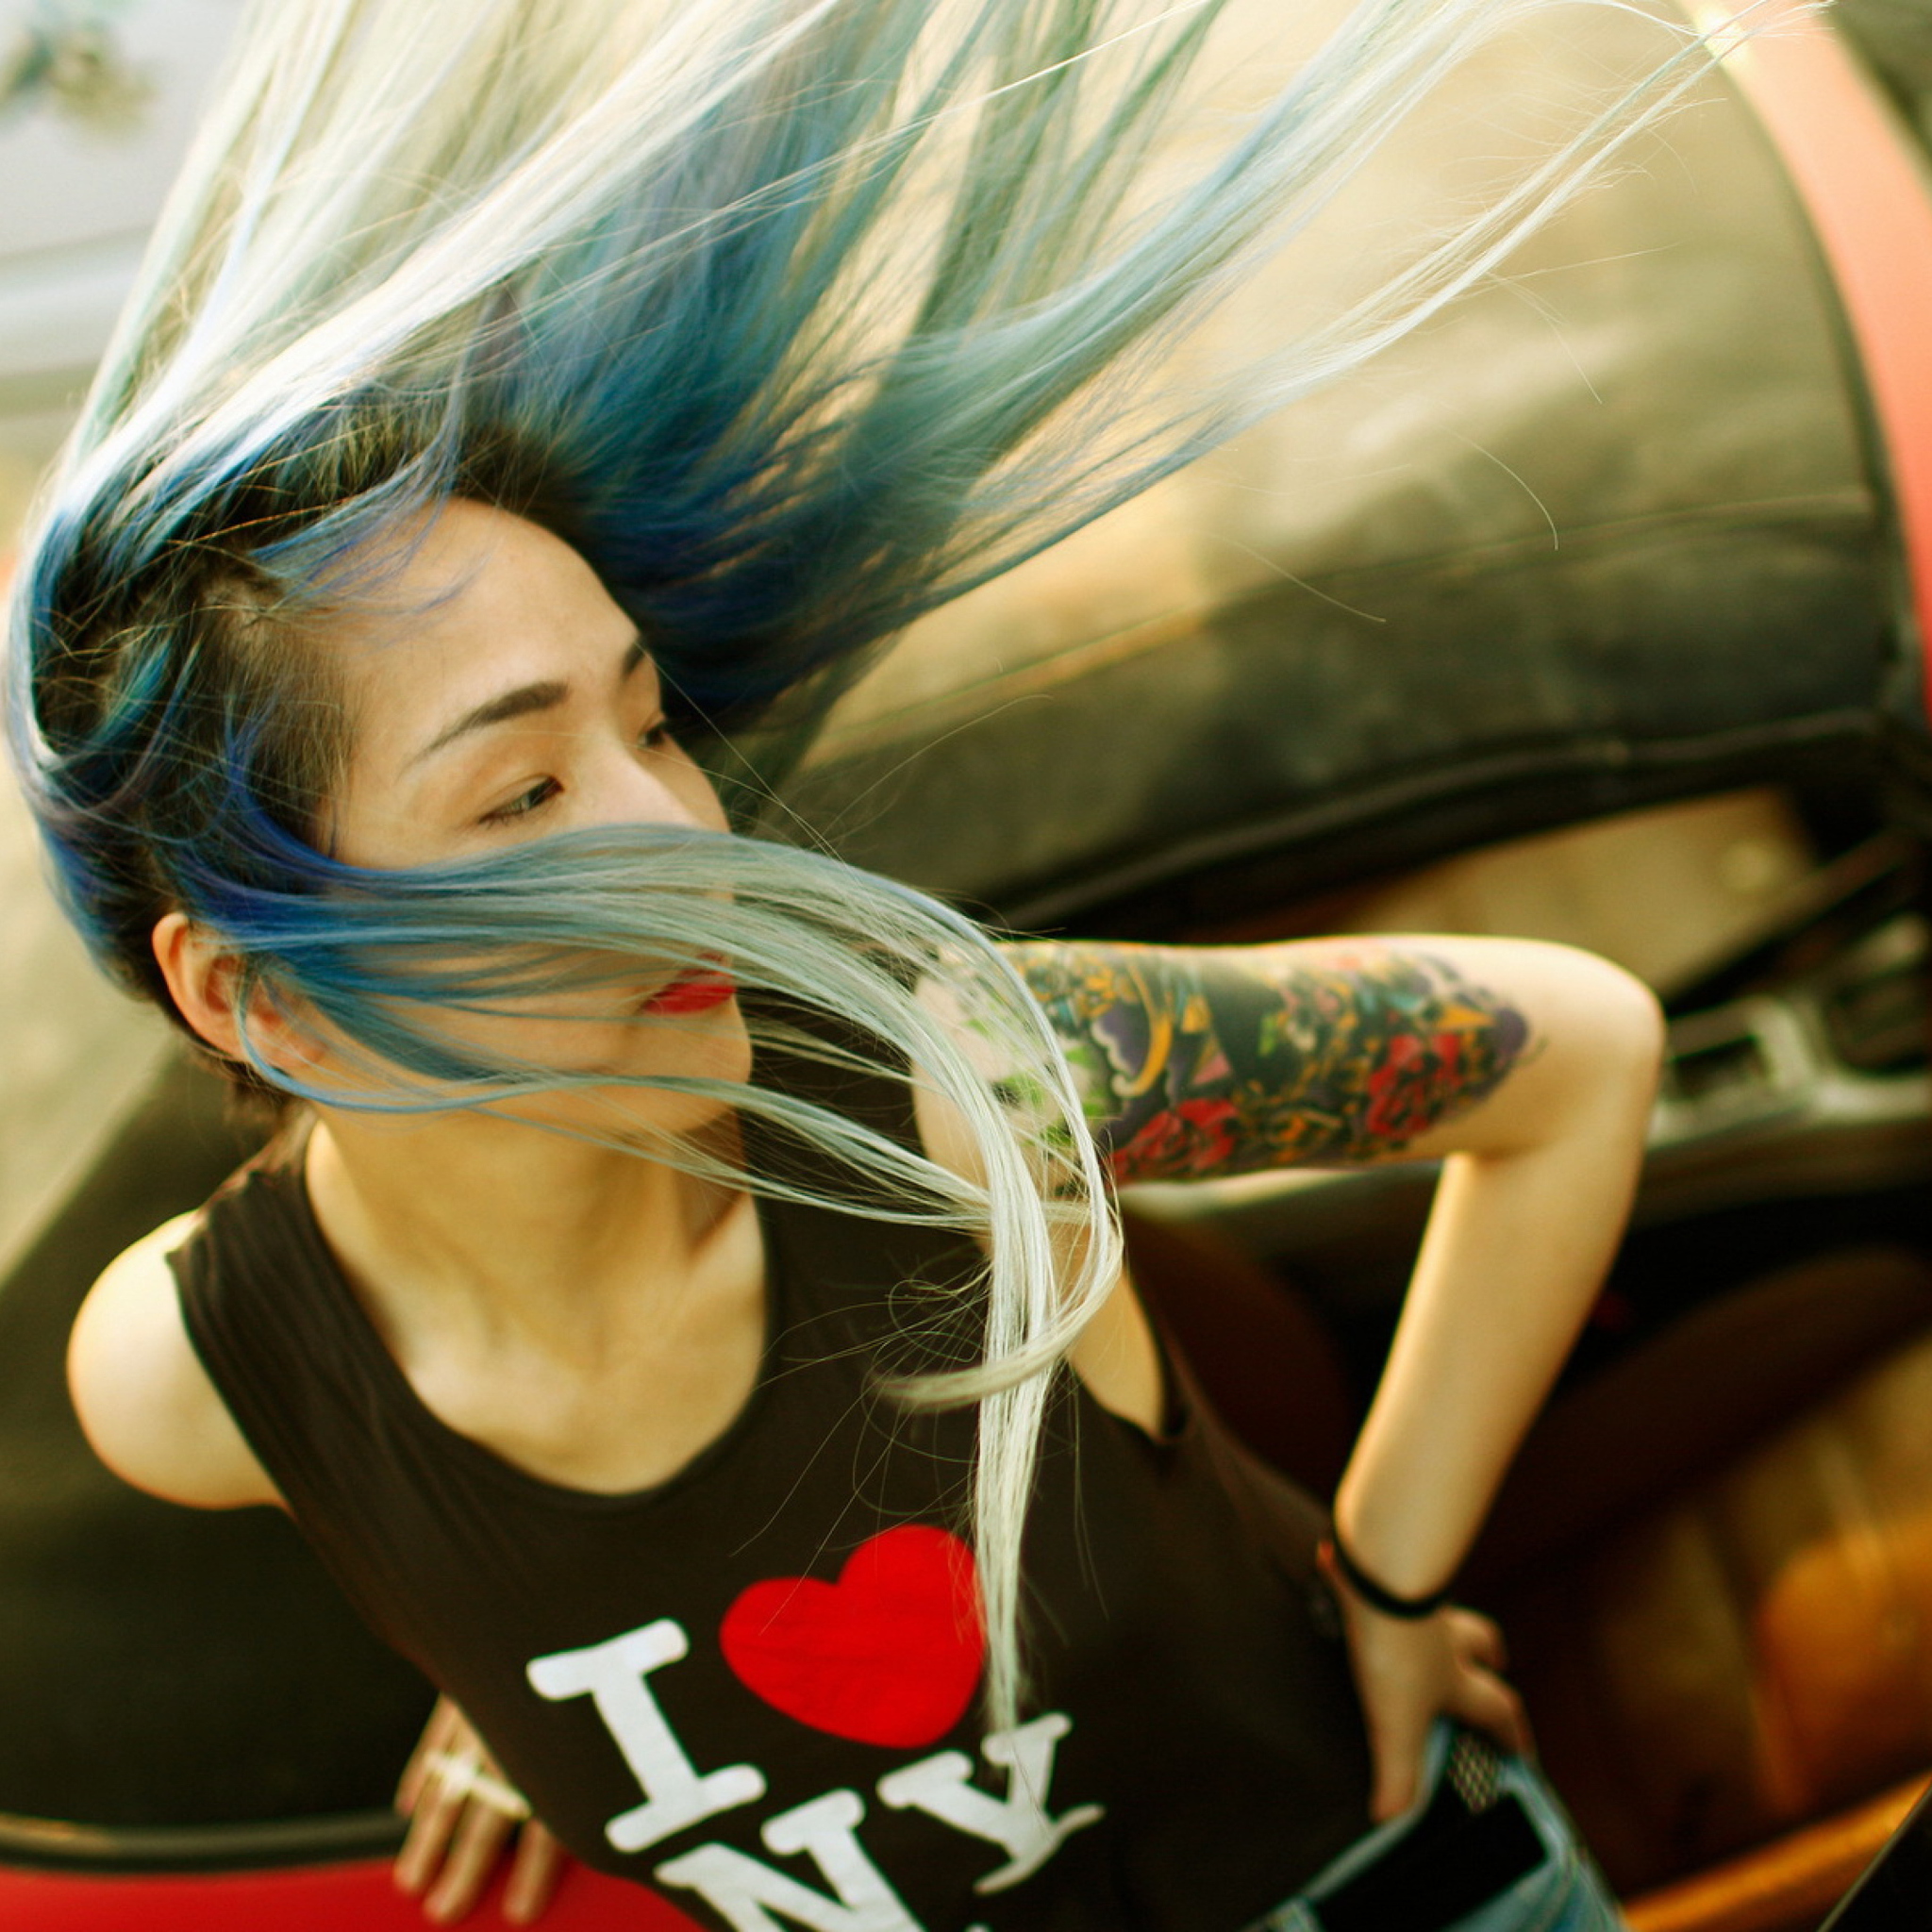 Cool Asian Girl With Blue Hair & I Love NY T-shirt wallpaper 2048x2048